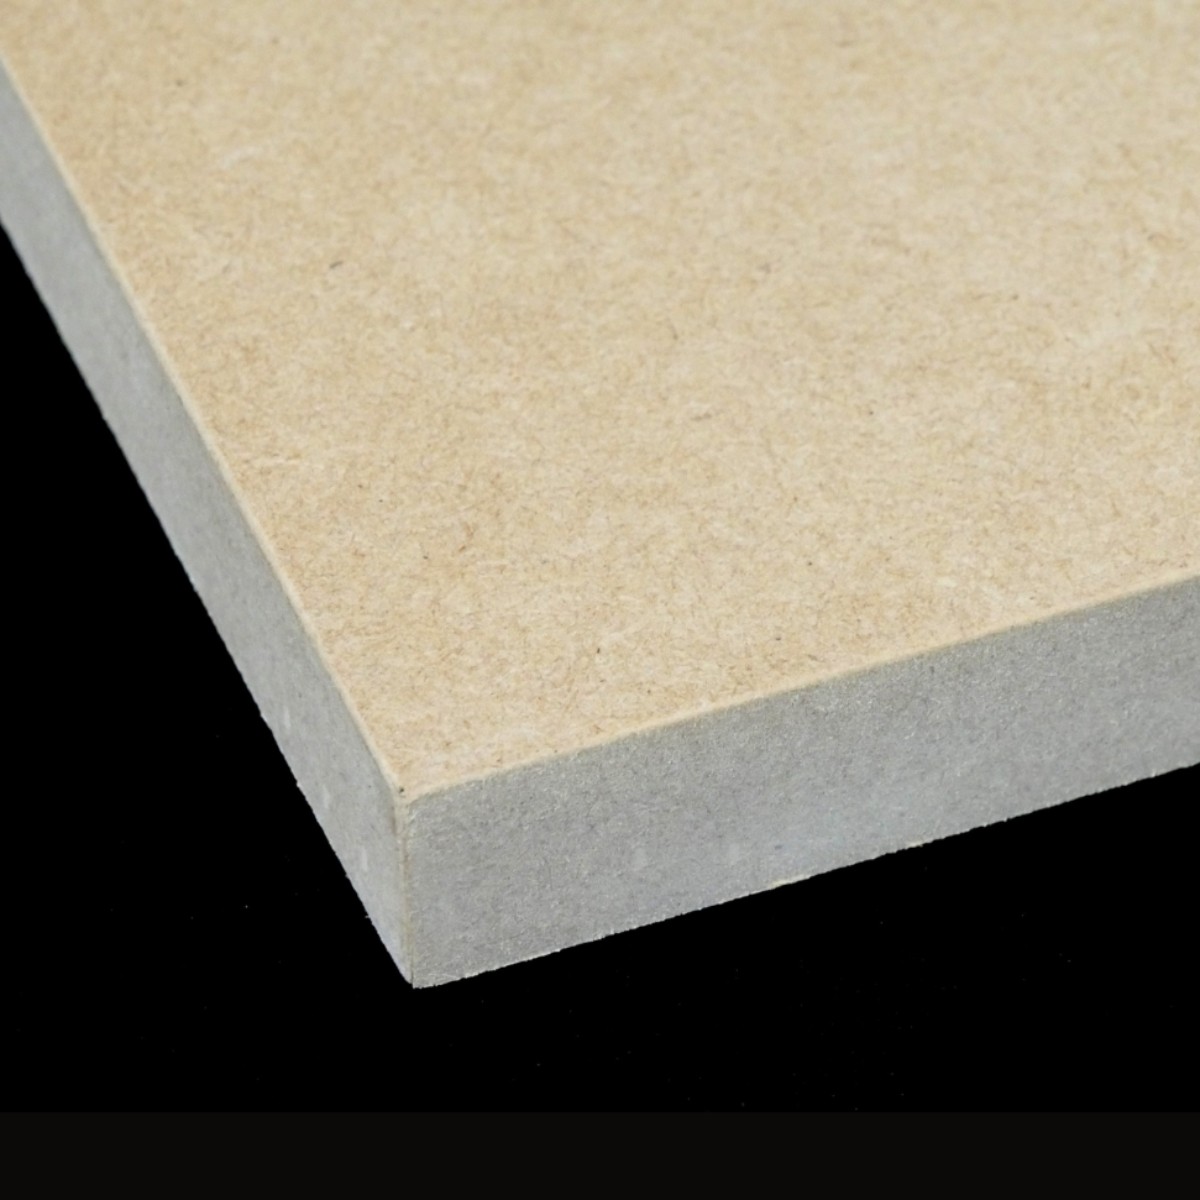 14″x18″ 356x457mm – Sanded